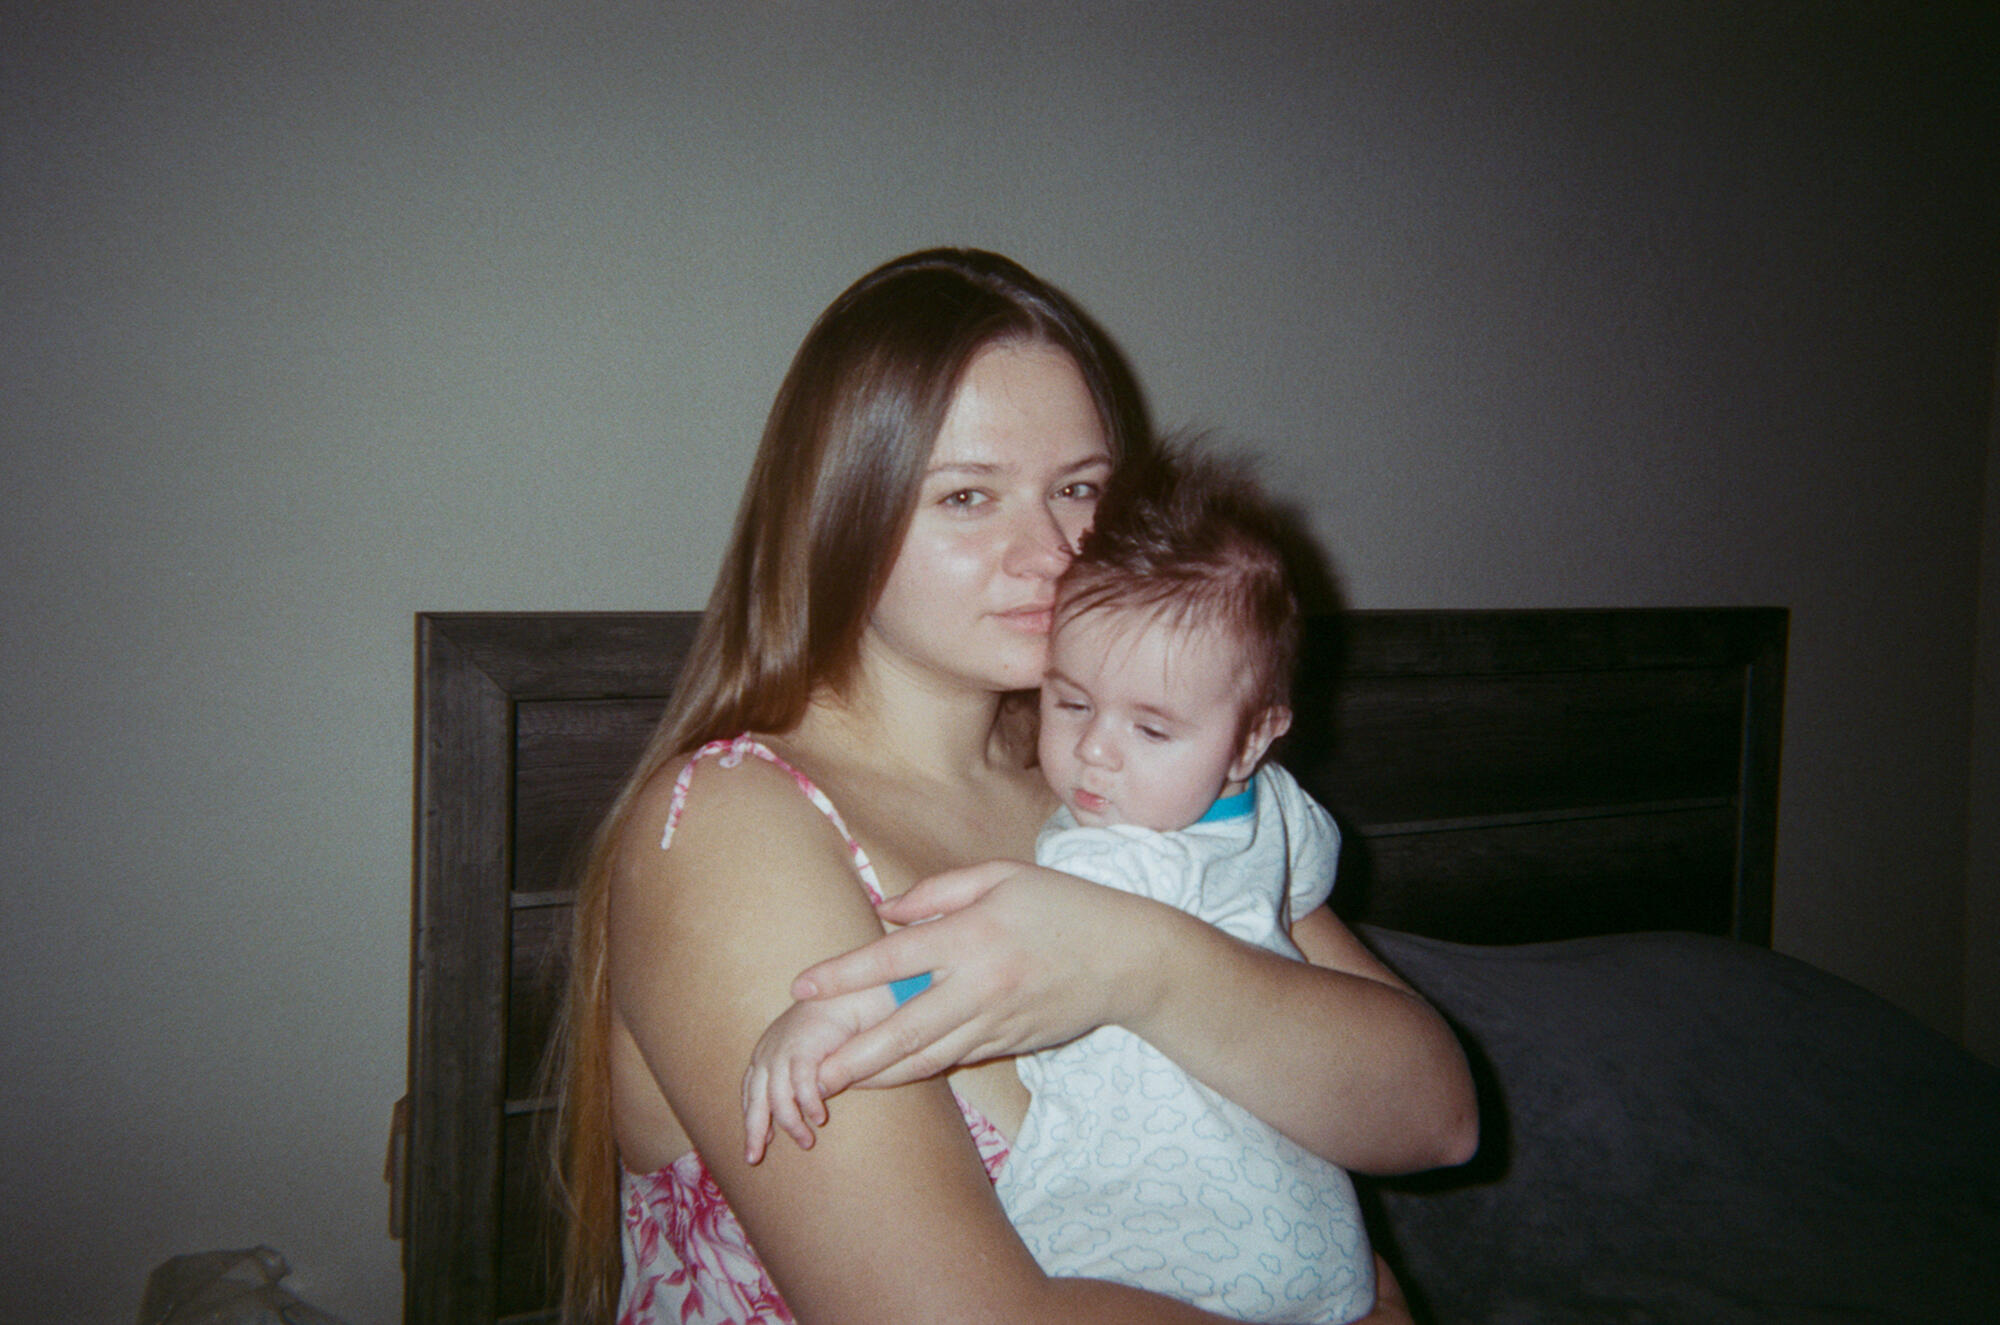 Olexandra holds baby Michael in her arms, facing the camera.